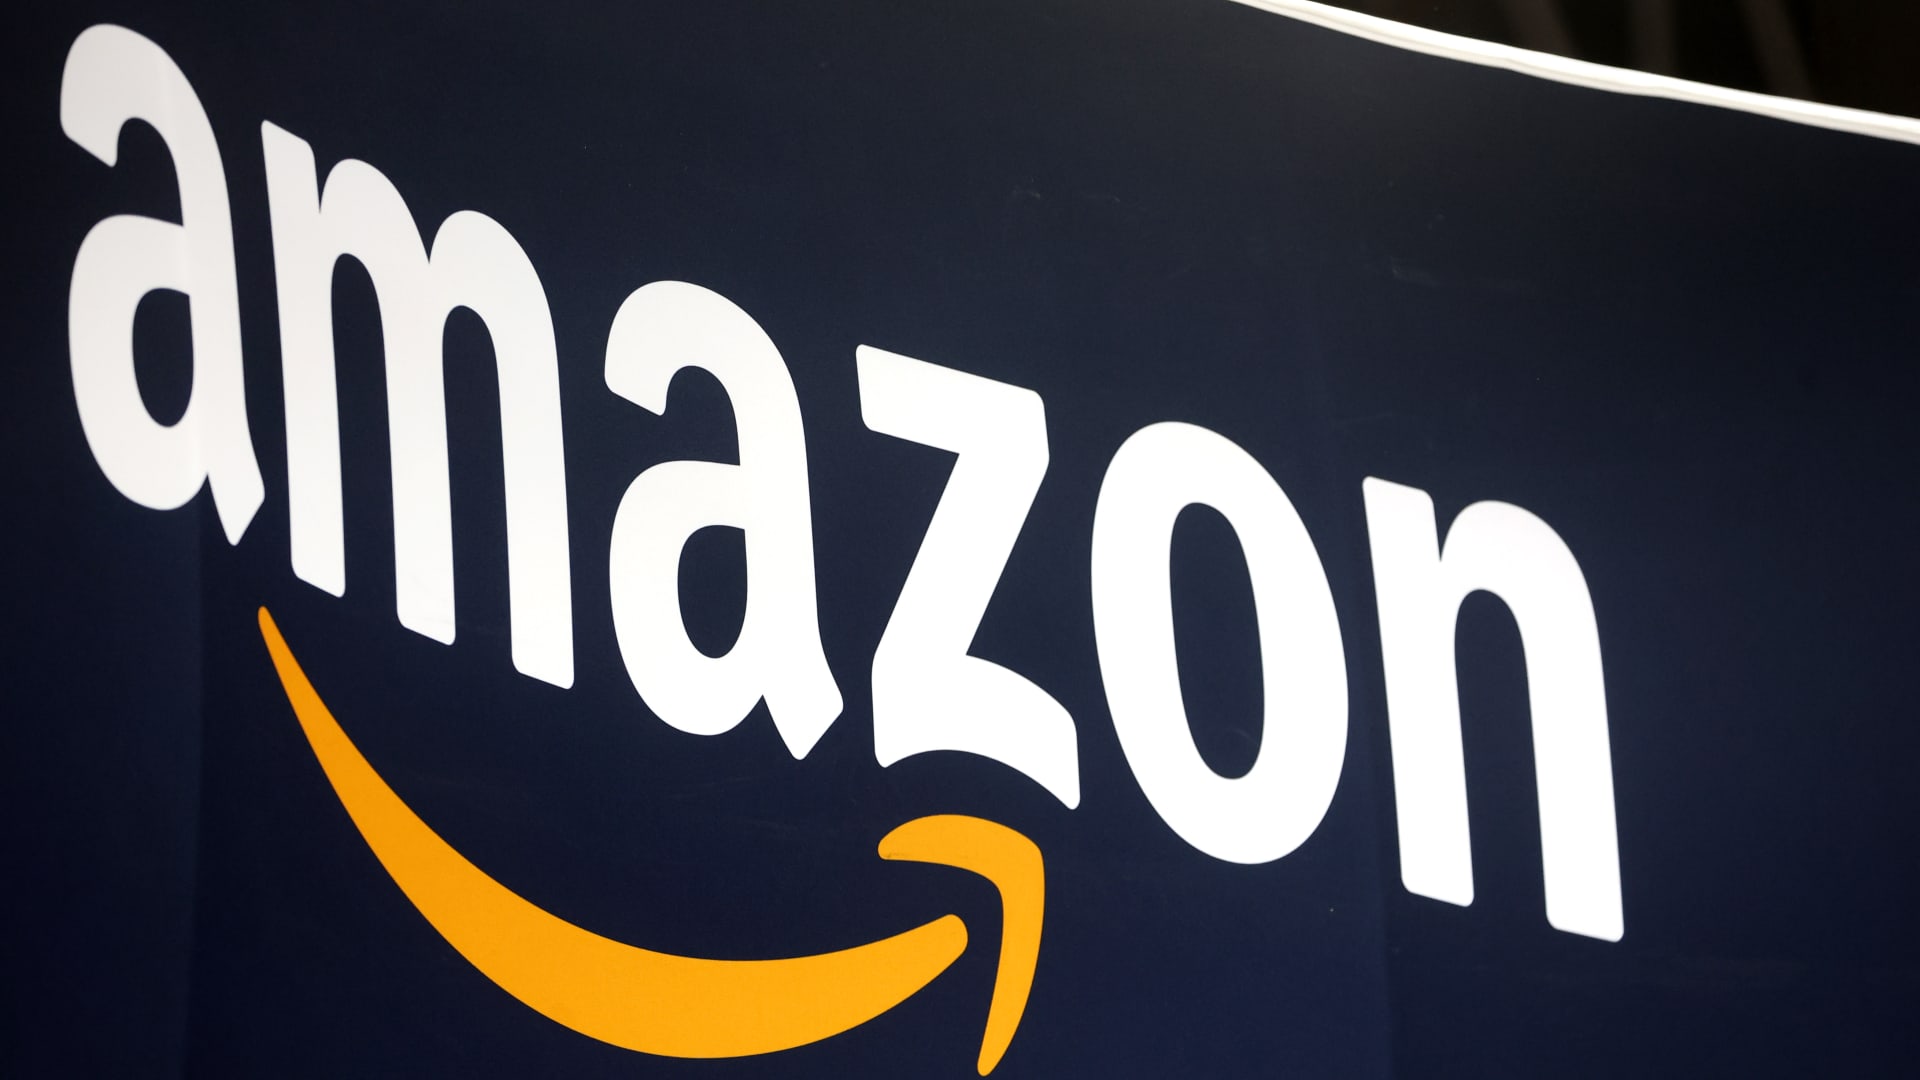 Amazon offers concessions to UK antitrust watchdog as part of probe into its marketplace practices